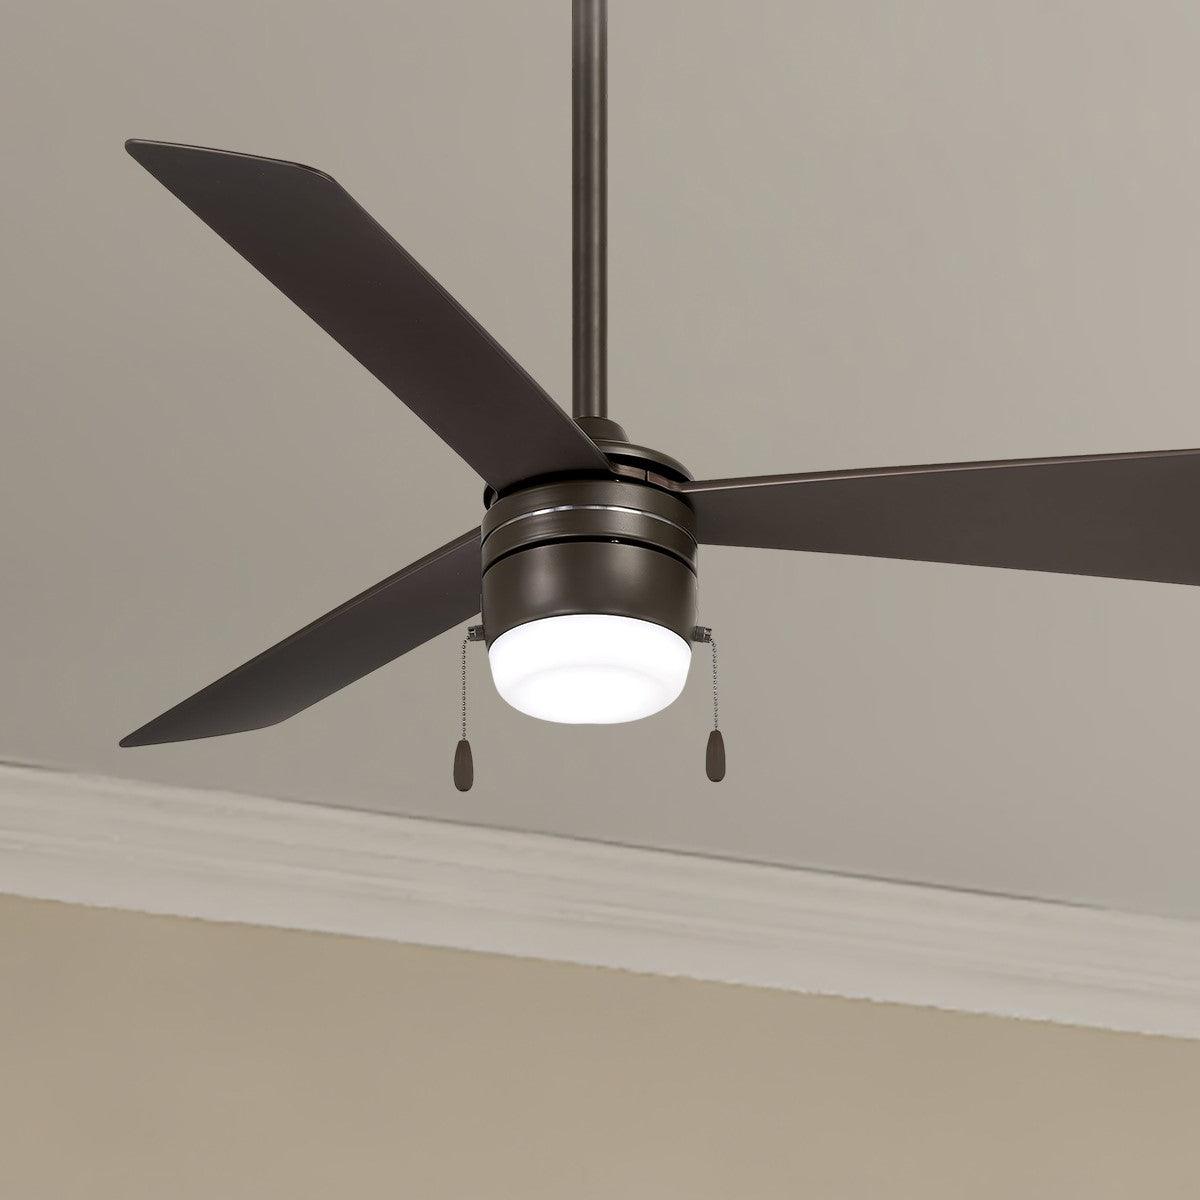 Vital 44 Inch Ceiling Fan With Light, Pull Chain Included